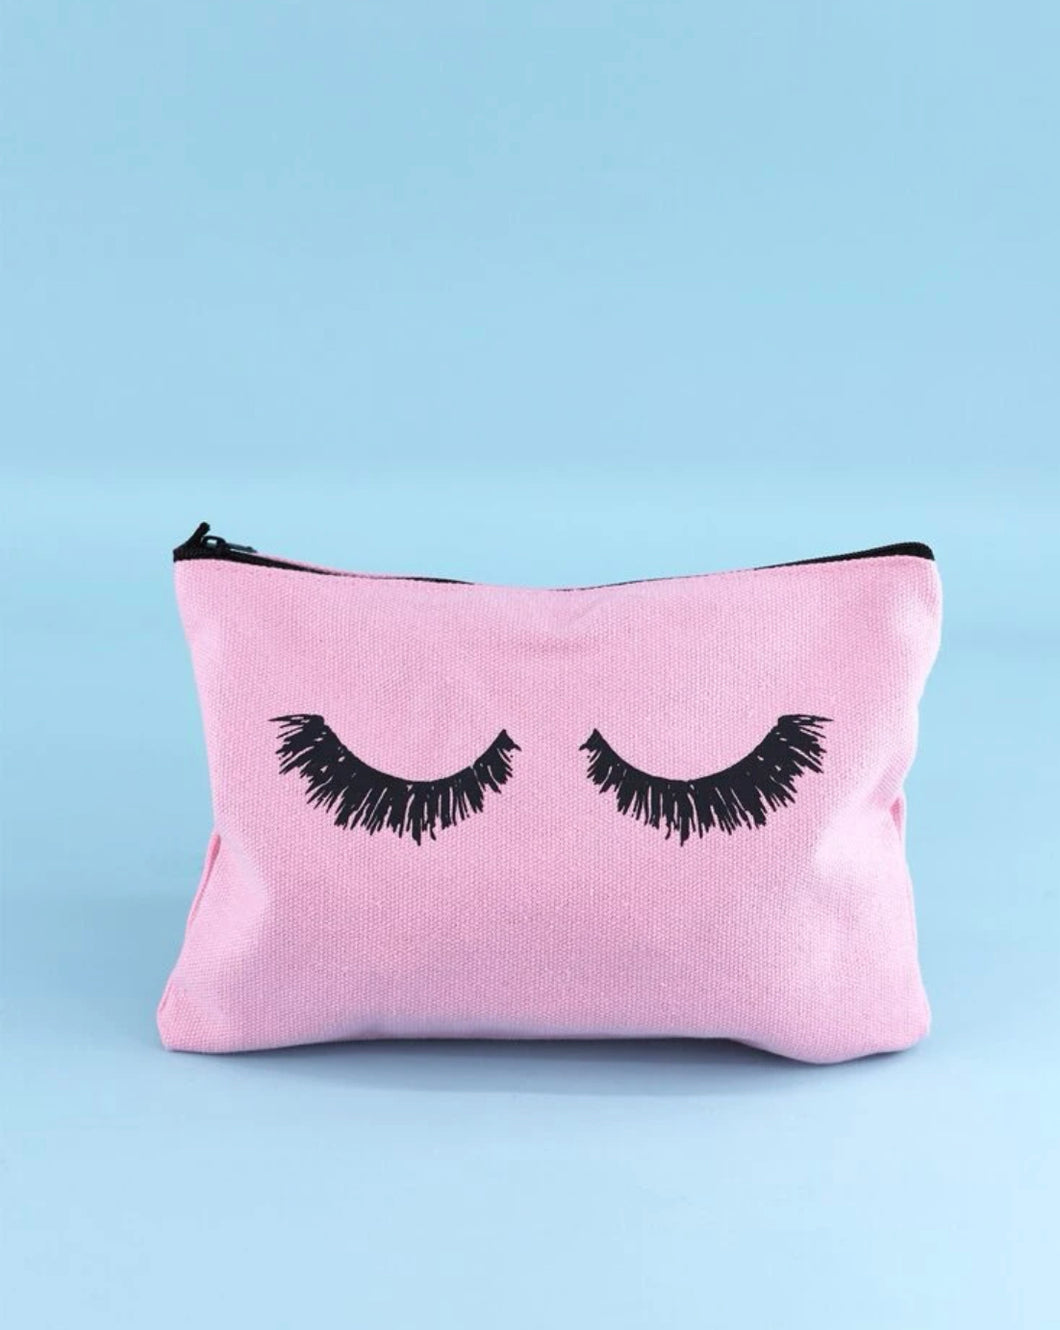 1pc Eyelash Cosmetic Bags Canvas Lash Makeup Bag Travel Make Up Pouches Toiletry Bag With Zipper For Women And Girls